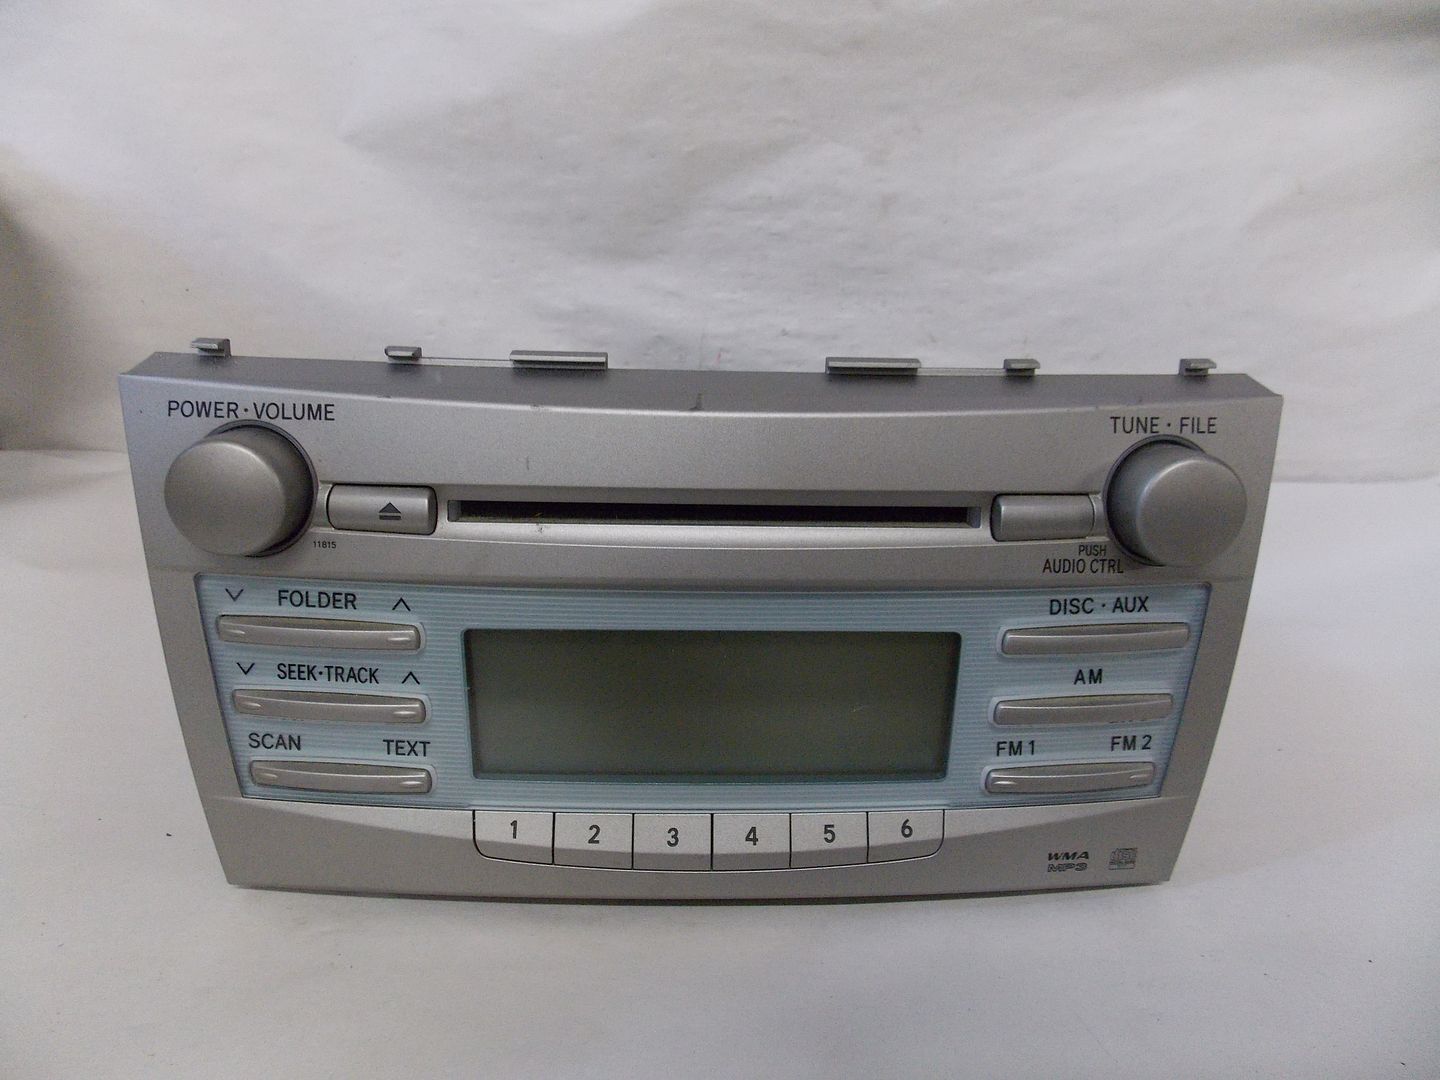 2007 Toyota camry mp3 player